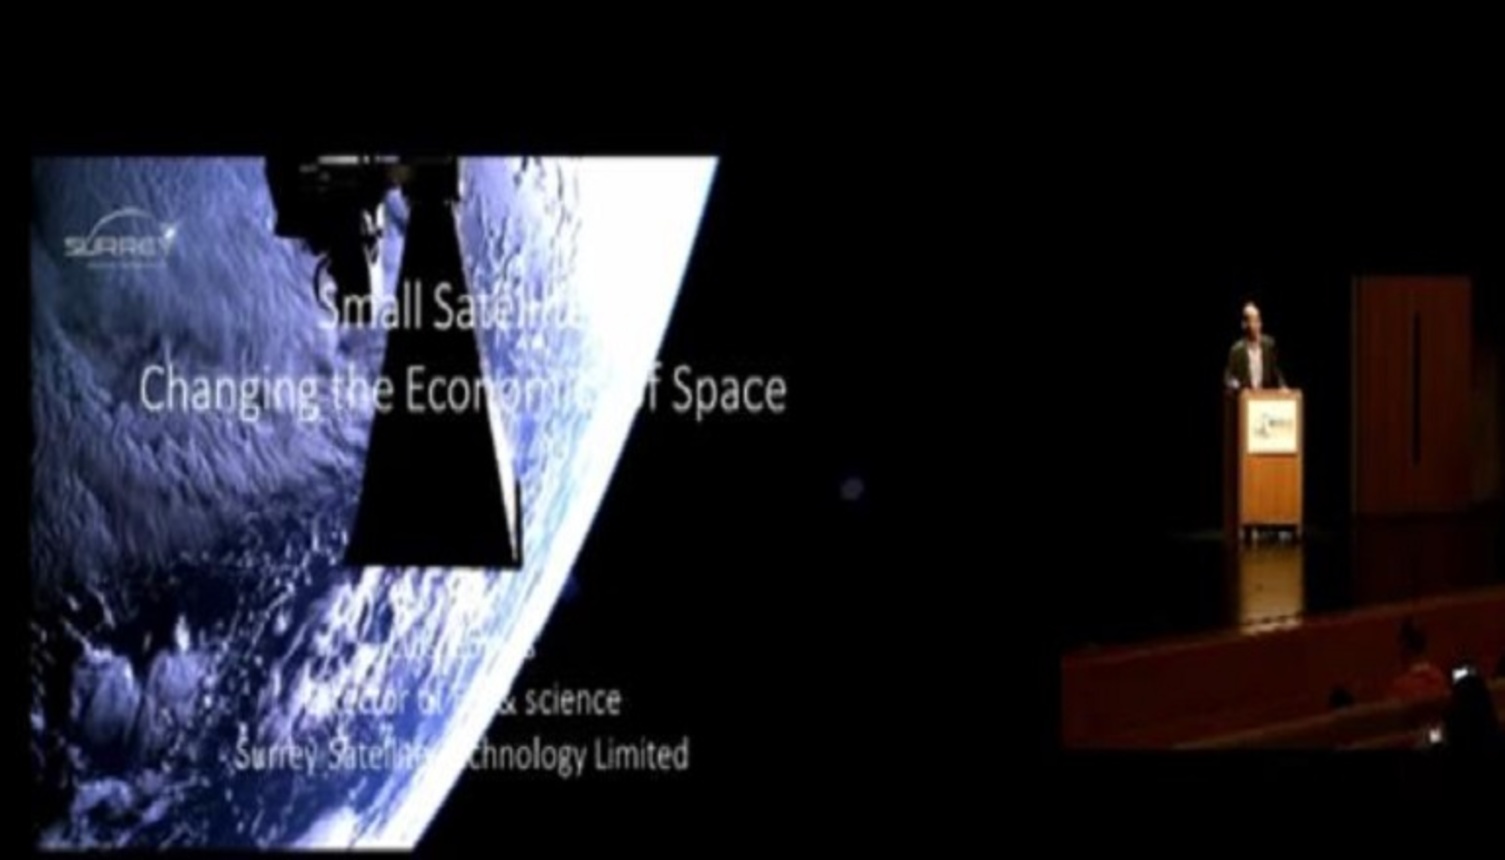 Small Satellites Changing the Economics of Space